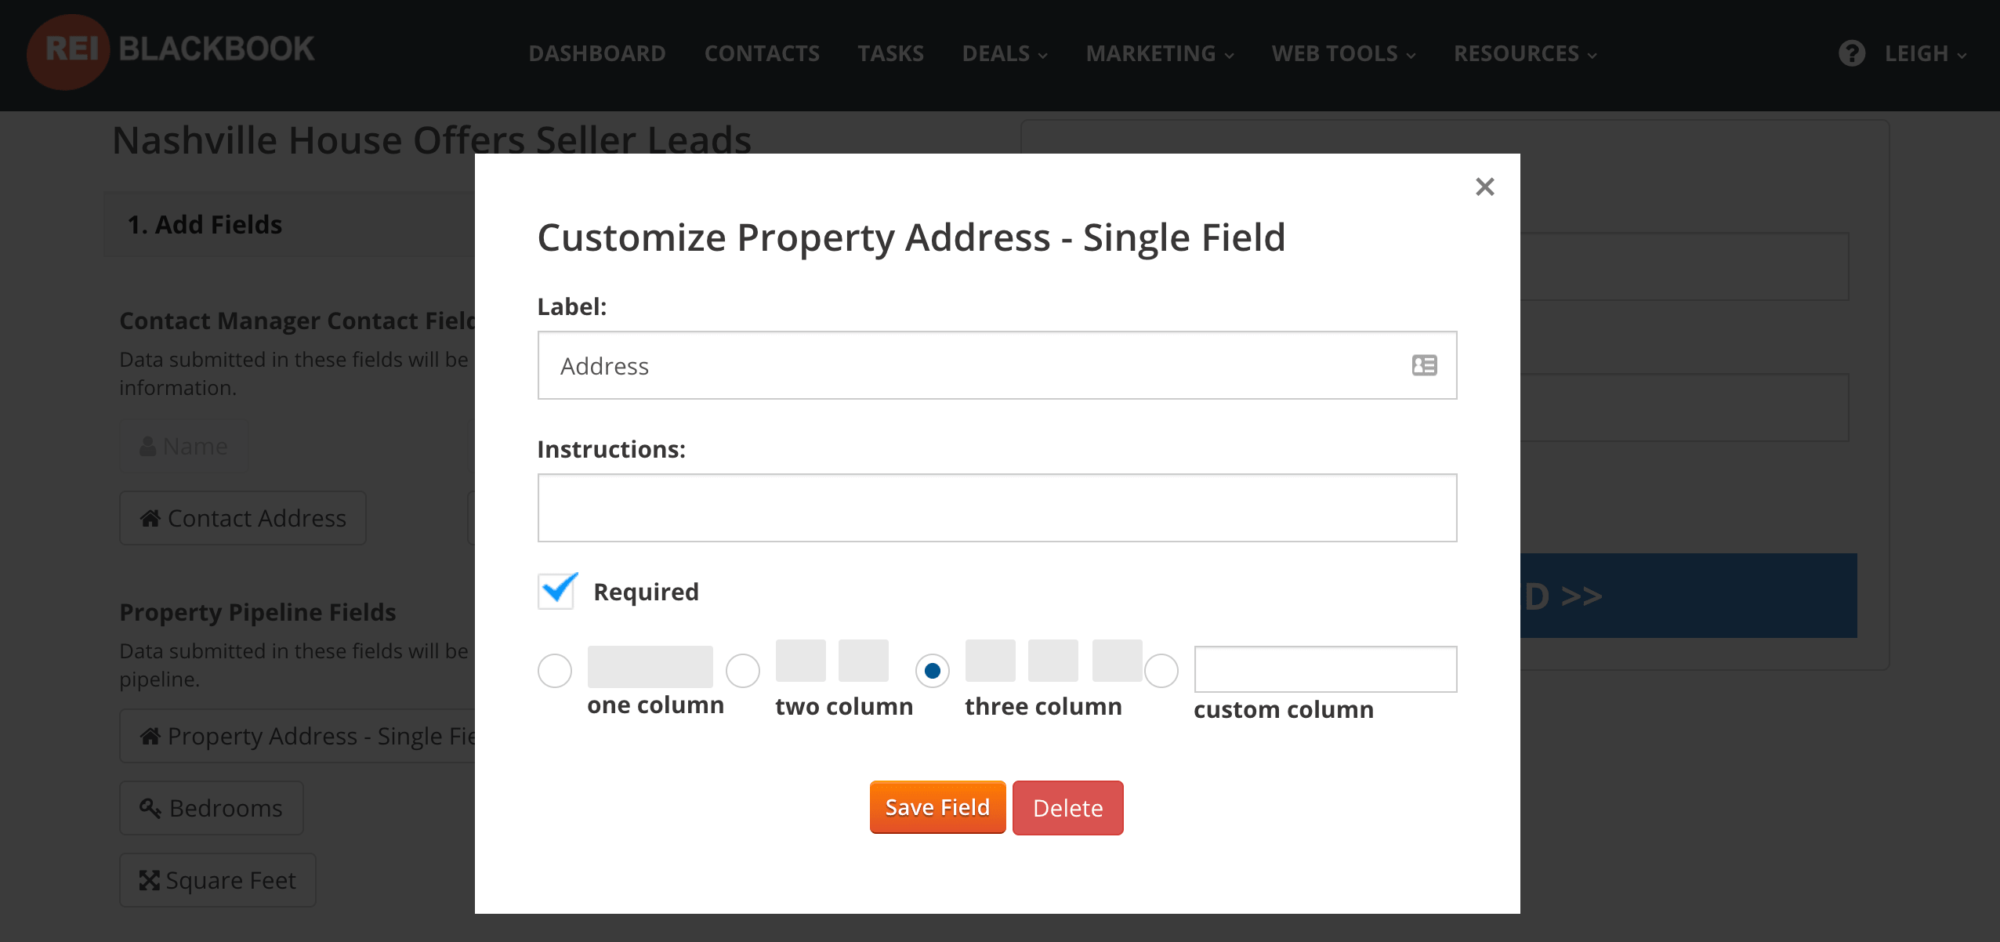 Check the box for "Required" if you'd like the to make the field mandatory on your real estate investor website.